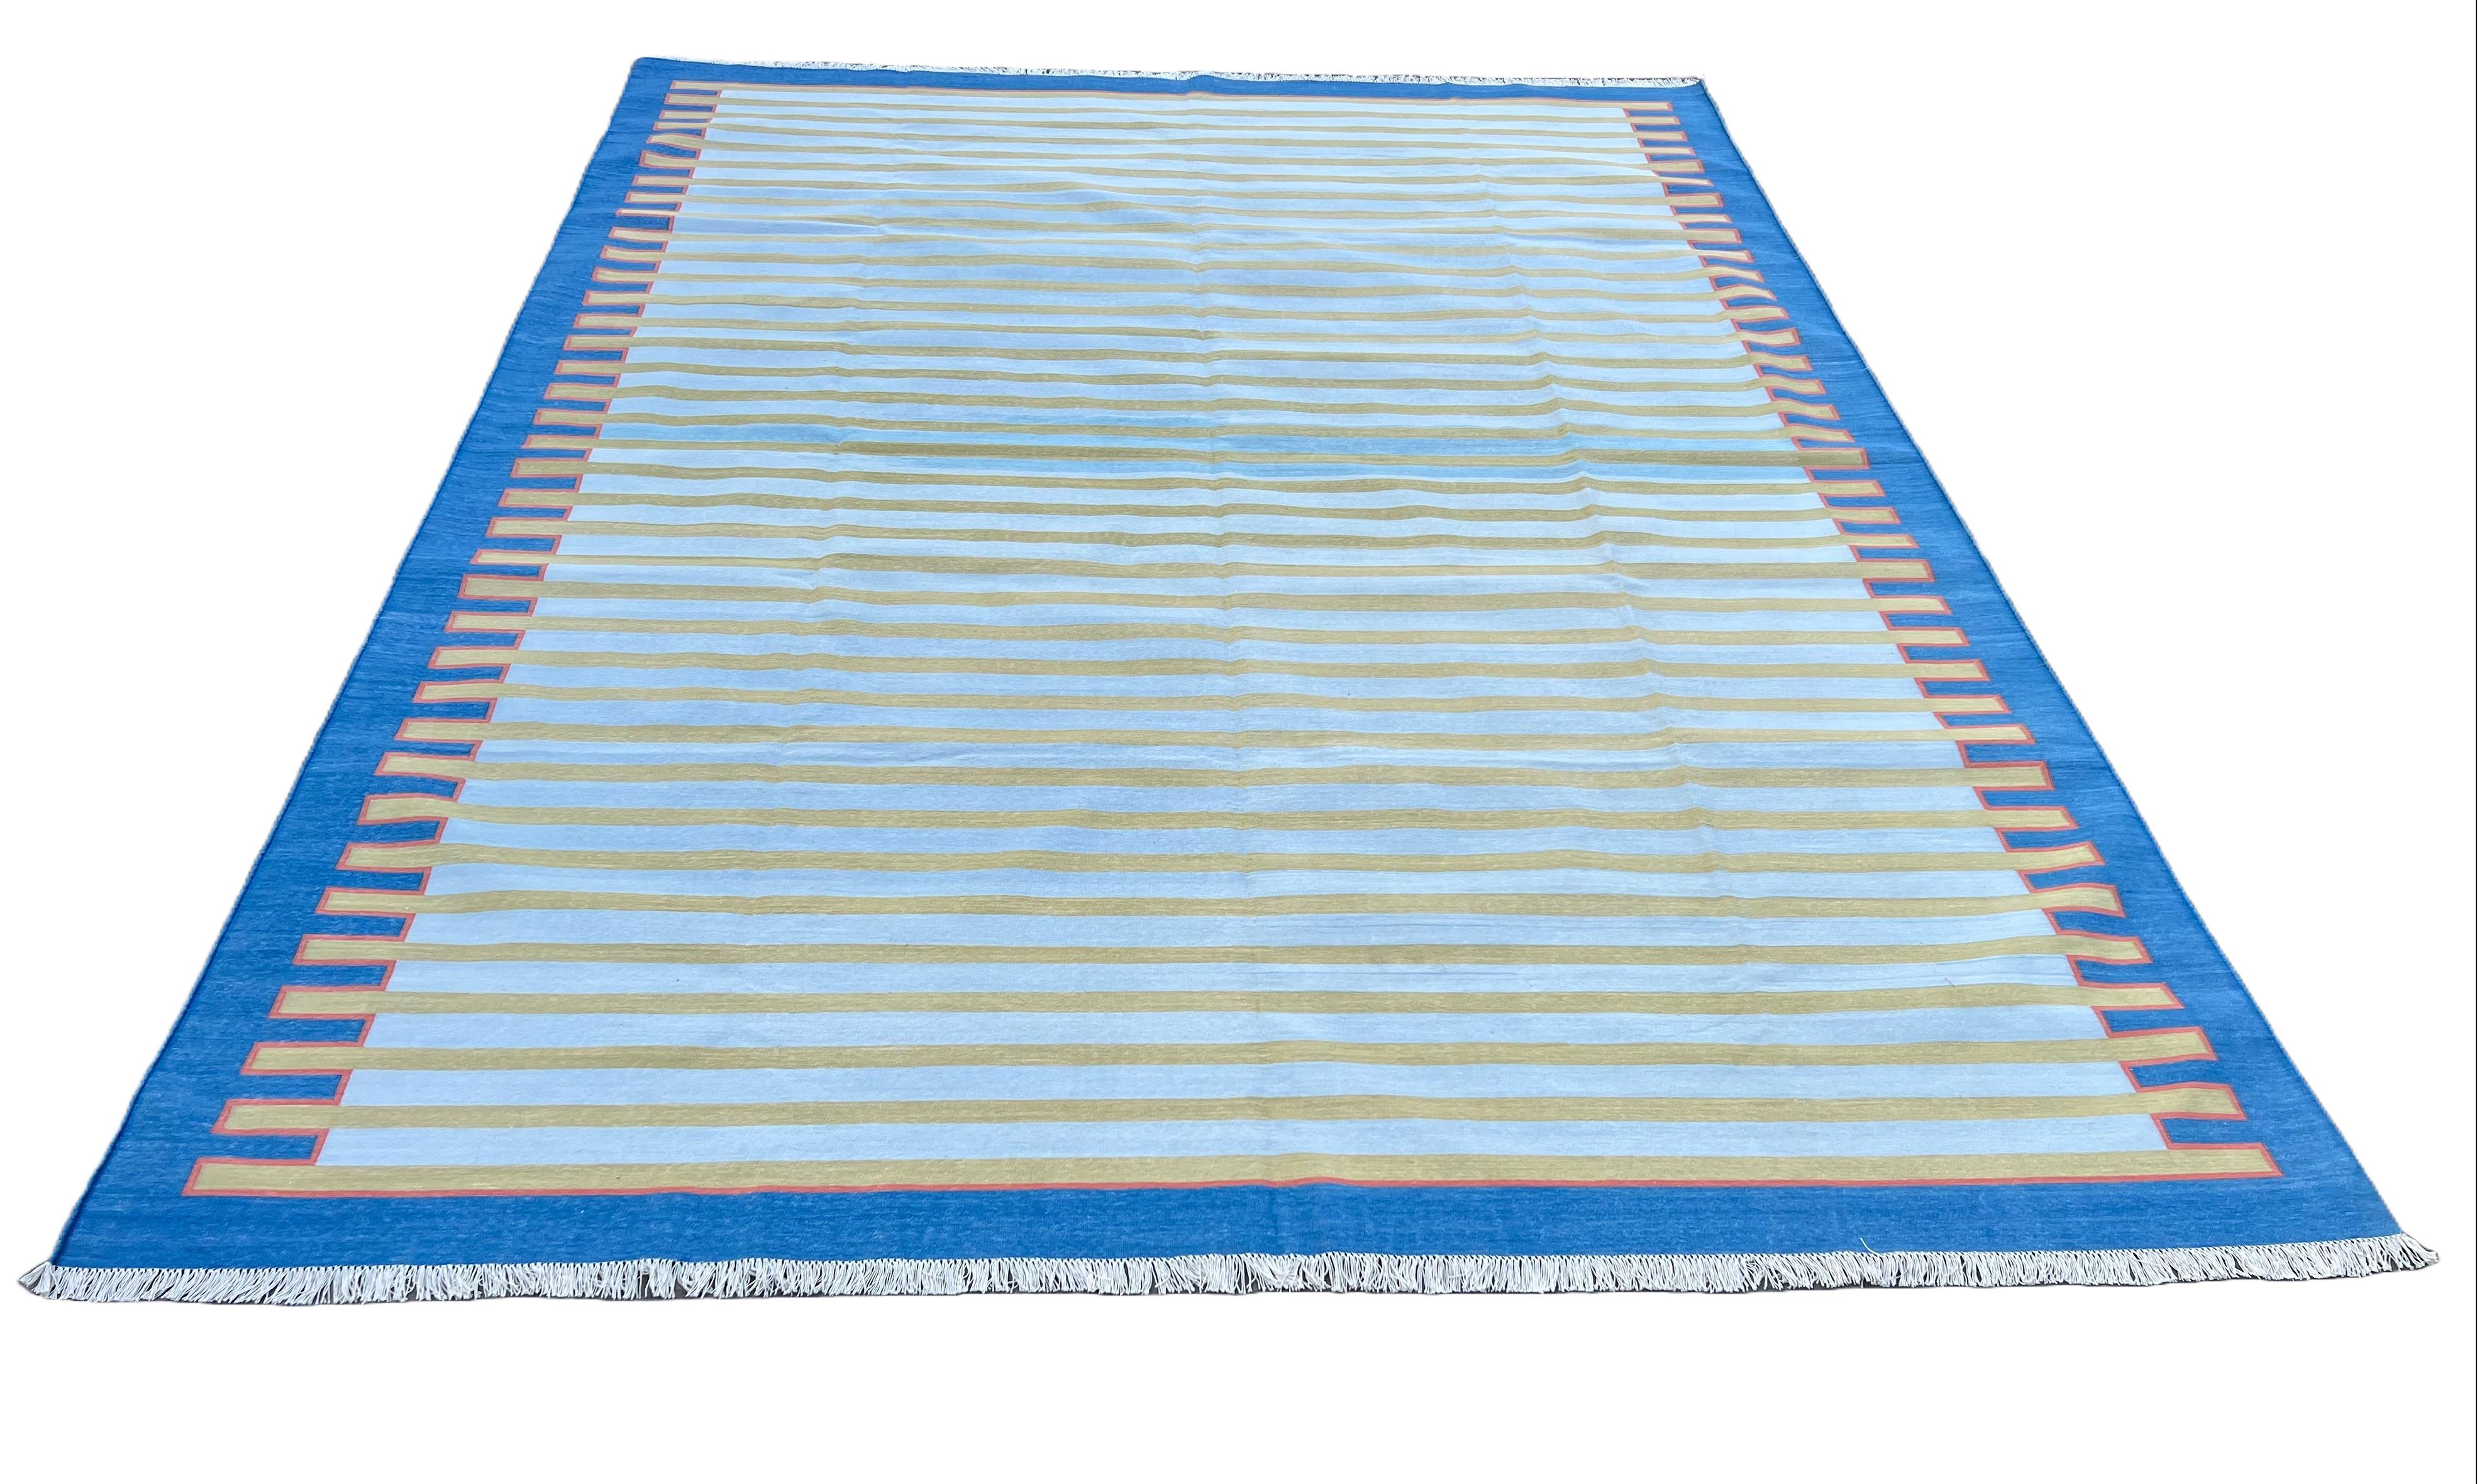 Indian Handmade Cotton Area Flat Weave Rug, 9x12 Blue And Green Zig Zag Striped Dhurrie For Sale